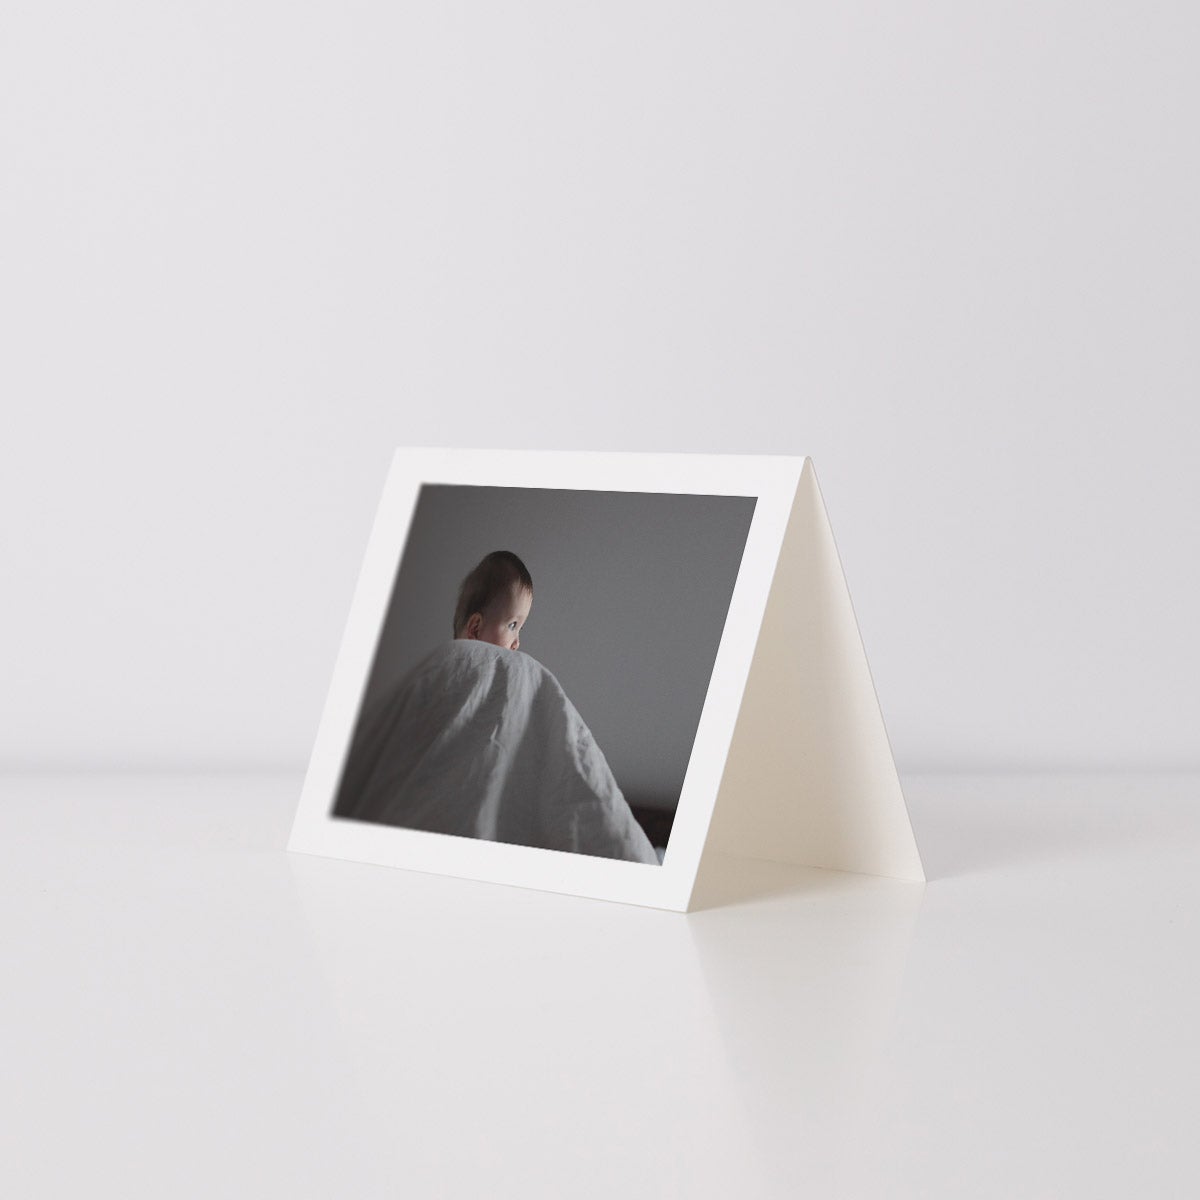 https://media.artifactuprising.com/media/catalog/product/3/-/3-by-5-folded-photo-cards-main02-little-girl-in-sheets_2x_1.jpg?width=2100&auto=webp